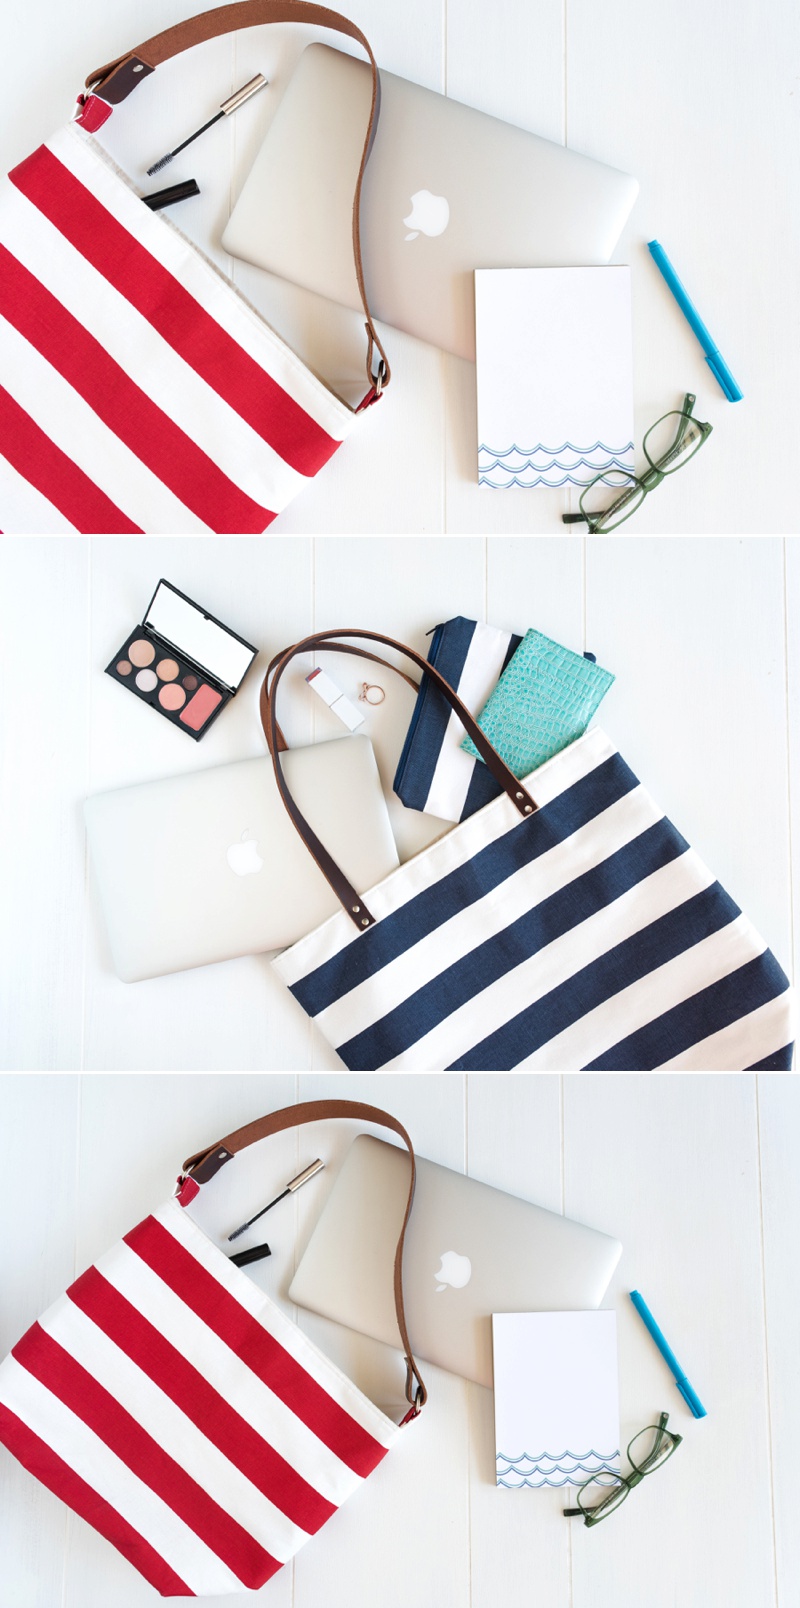 handbag tote purse accessories Etsy product photography and styling